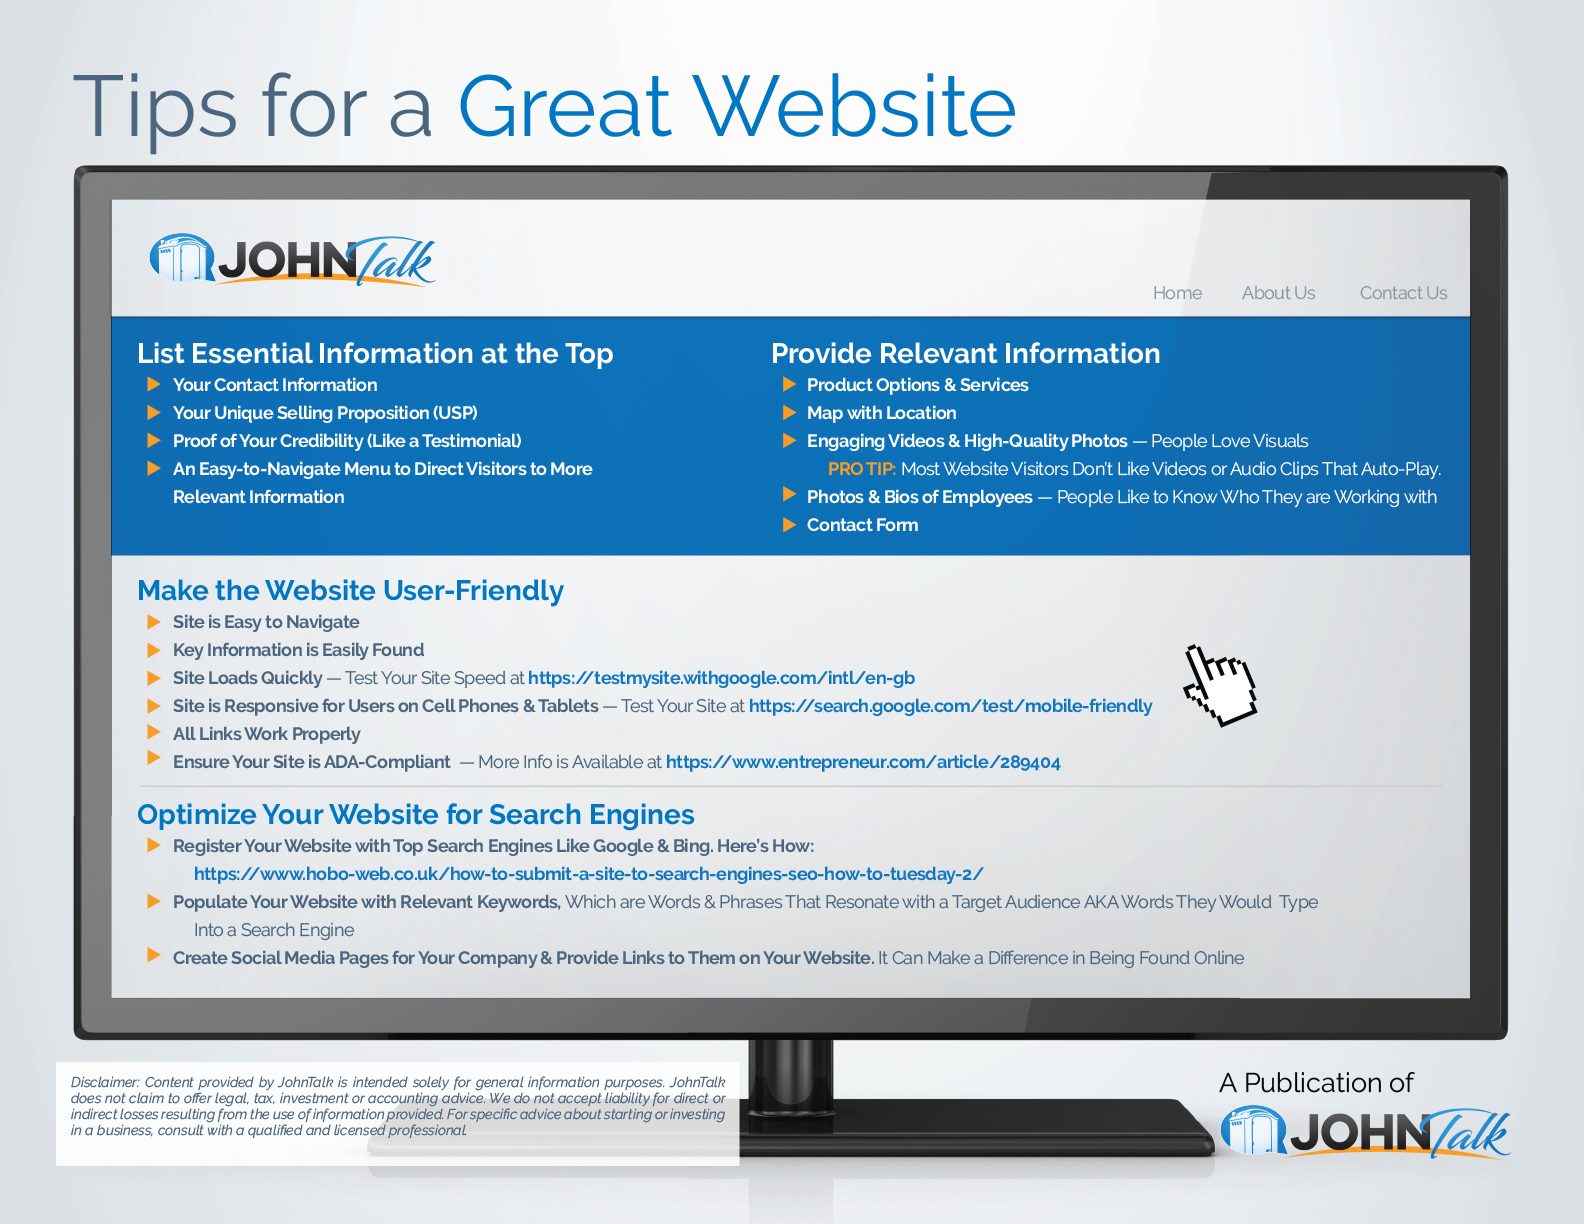 Tips for a Great Website